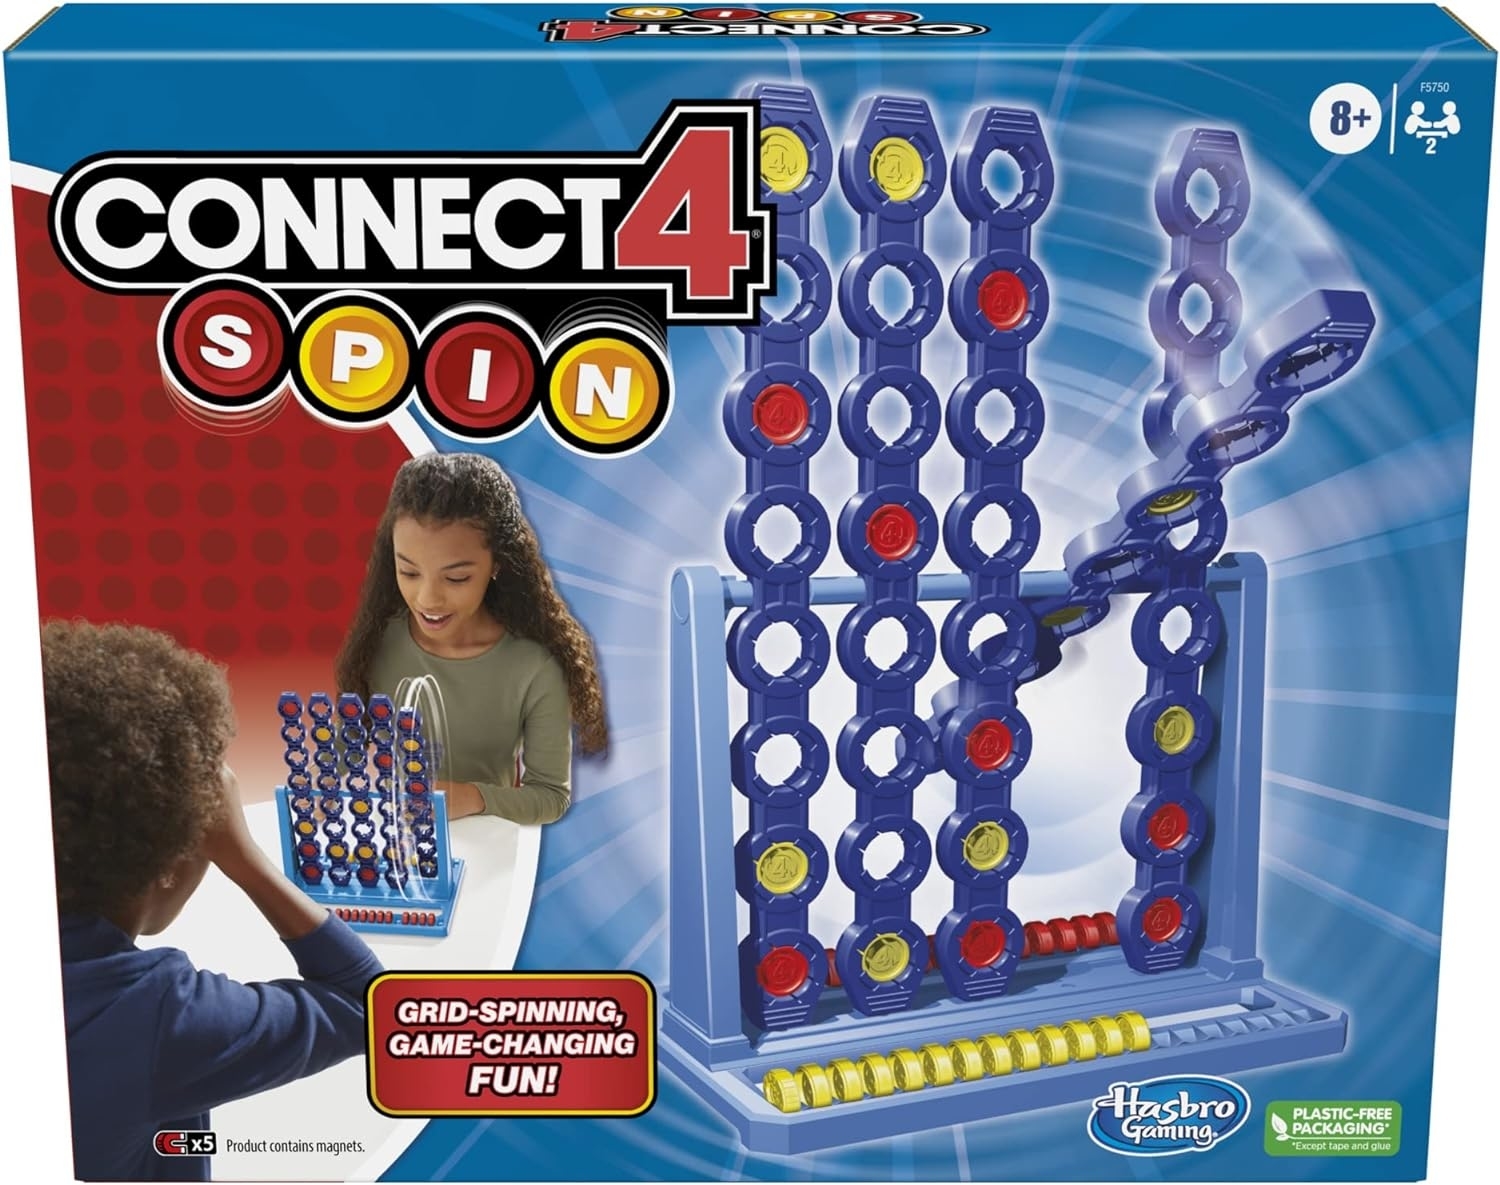 the connect 4 spin game box